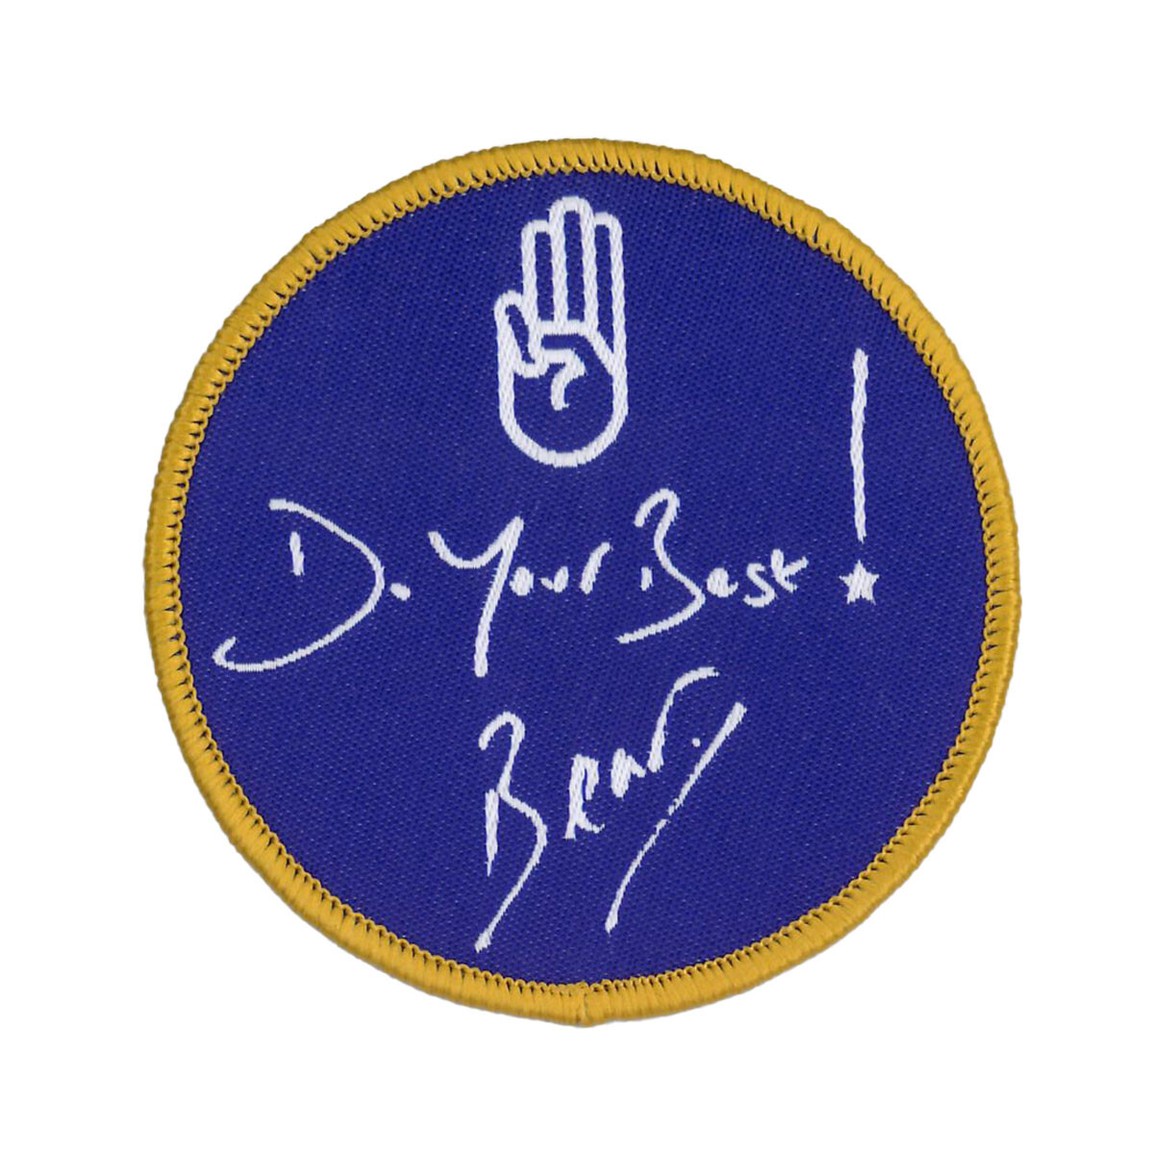 The image shows a navy badge with a gold border that says 'Do Your Best' with Bear's signature in white underneath. 